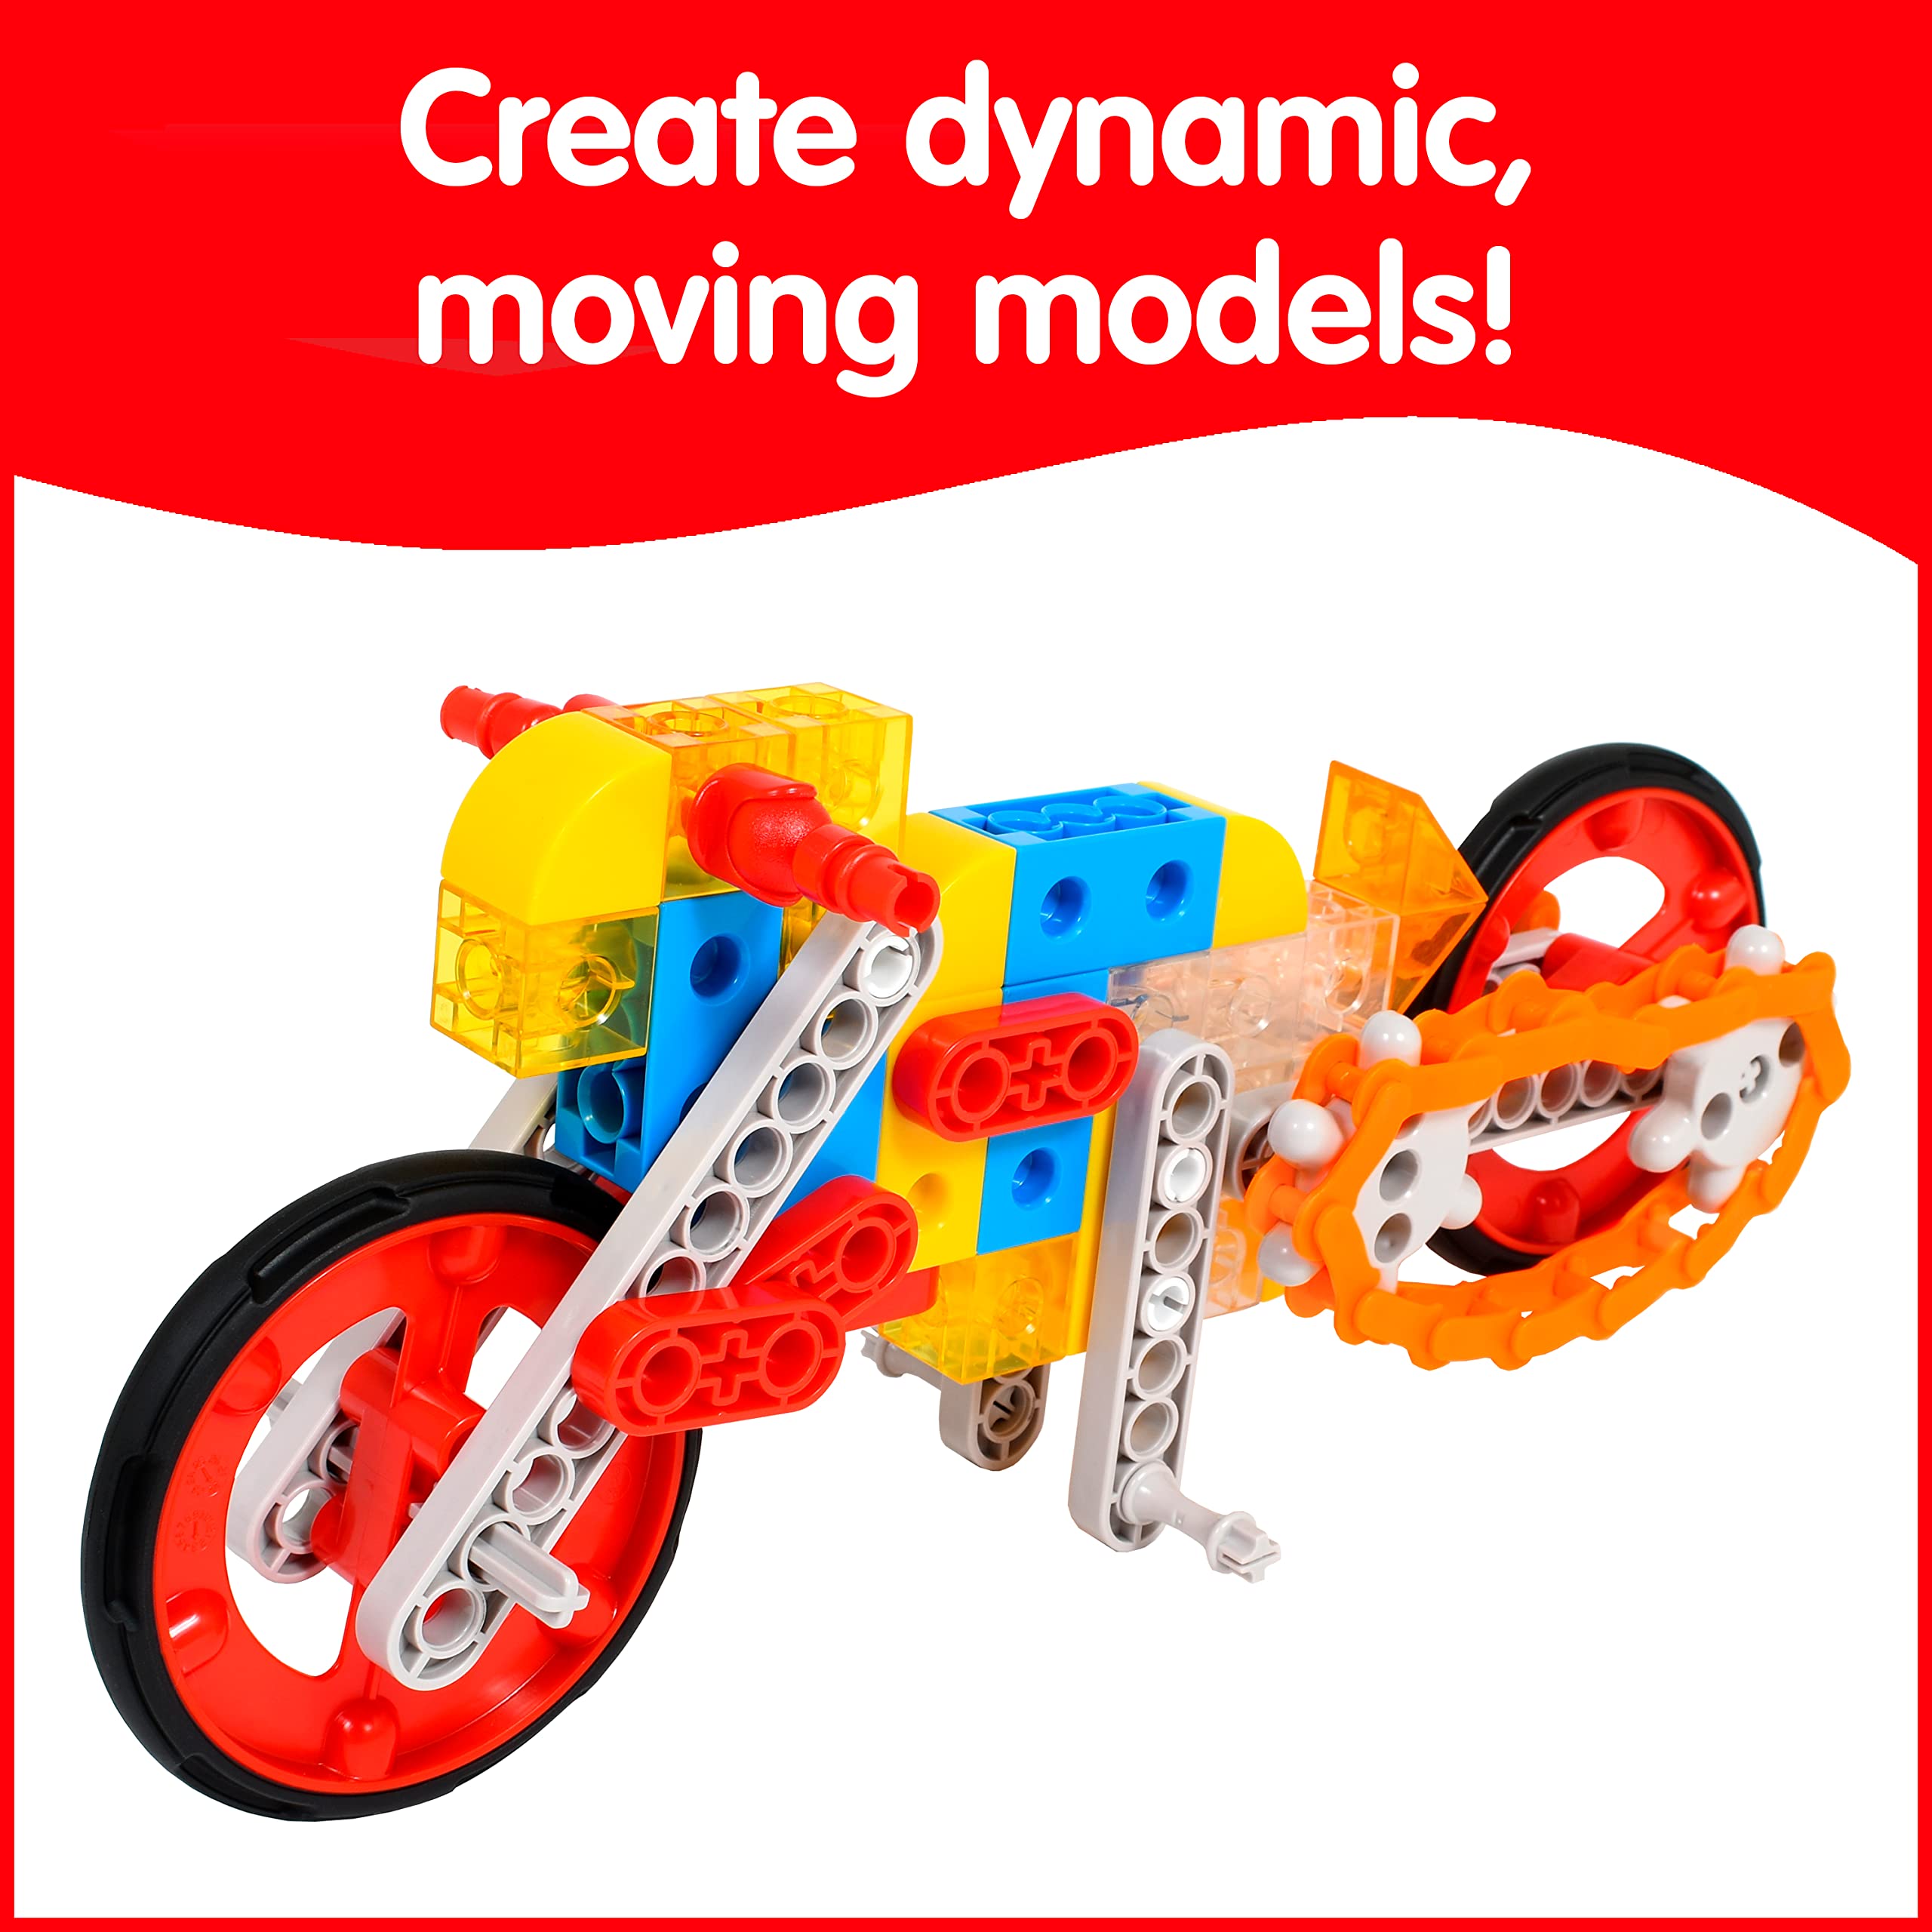 edxeducation My Gears Machine Set - 181 Pieces - 8+ Activities - Gears Toys for Kids - Build Rotating, Moving Models - Building Toys for Kids Ages 4-8